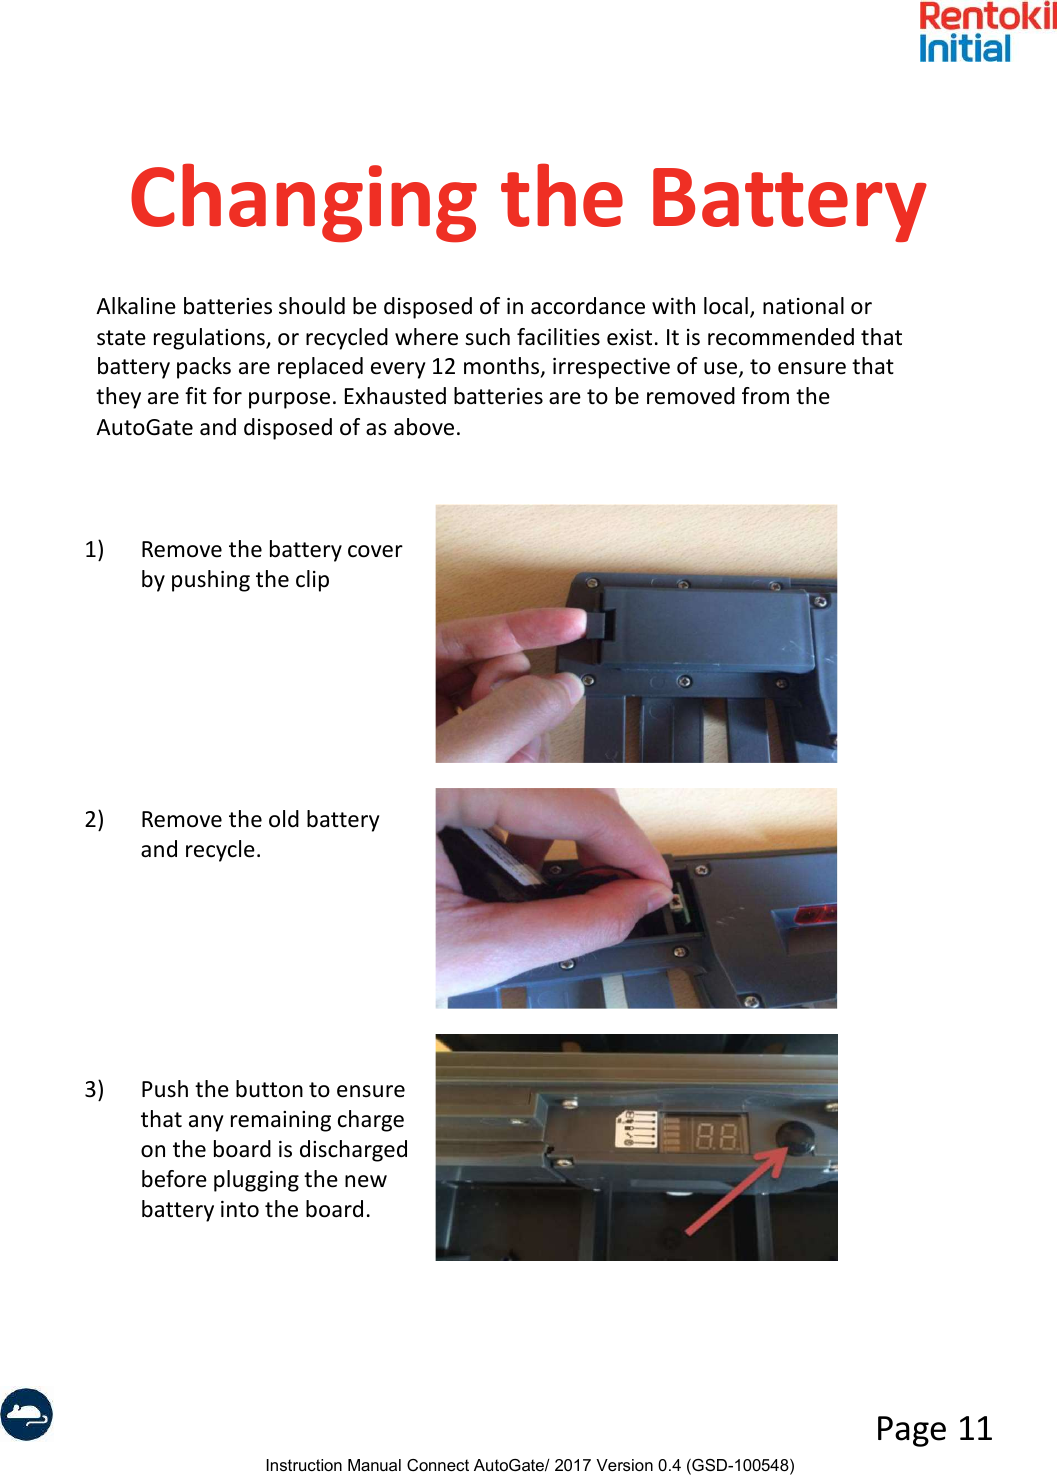 Instruction Manual Connect AutoGate/ 2017 Version 0.4 (GSD-100548)Page 11Changing the Battery1) Remove the battery cover by pushing the clip2) Remove the old battery and recycle.3) Push the button to ensure that any remaining charge on the board is discharged before plugging the new battery into the board.Alkaline batteries should be disposed of in accordance with local, national or state regulations, or recycled where such facilities exist. It is recommended that battery packs are replaced every 12 months, irrespective of use, to ensure that they are fit for purpose. Exhausted batteries are to be removed from the AutoGate and disposed of as above.